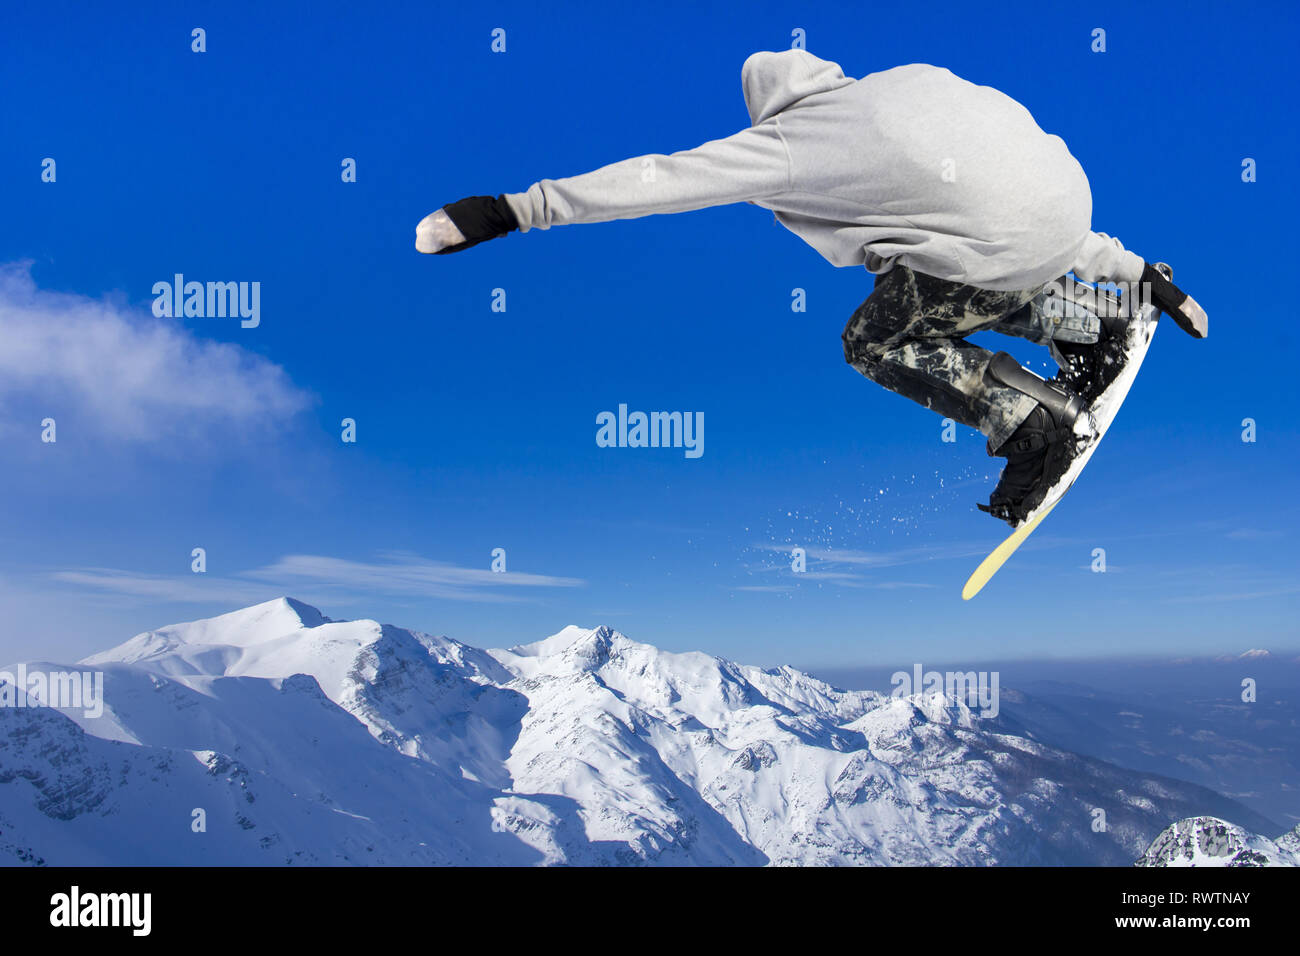 Extreme Jumping Snowboarder at jump above mountains at sunny day Stock Photo